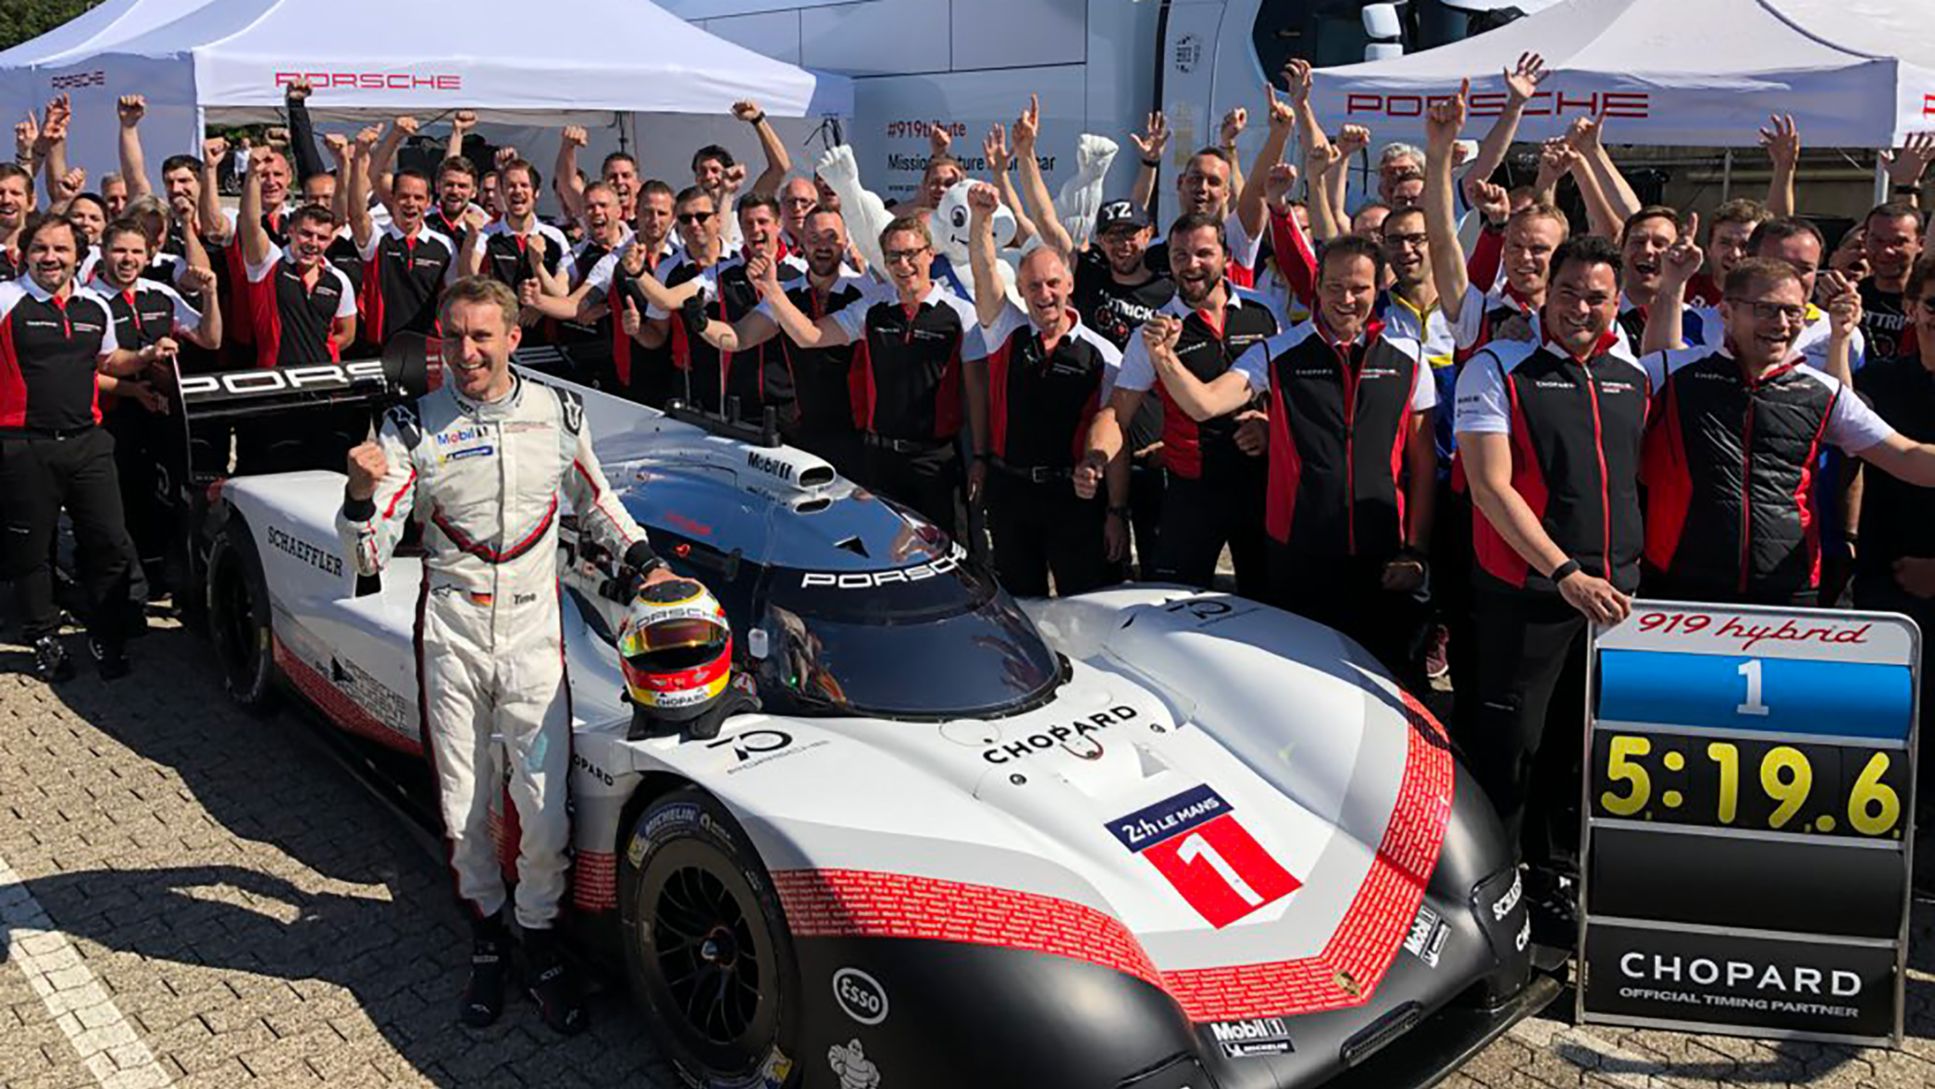 5 19 55 Minutes Porsche 919 Hybrid Evo Takes Record In The Green Hell